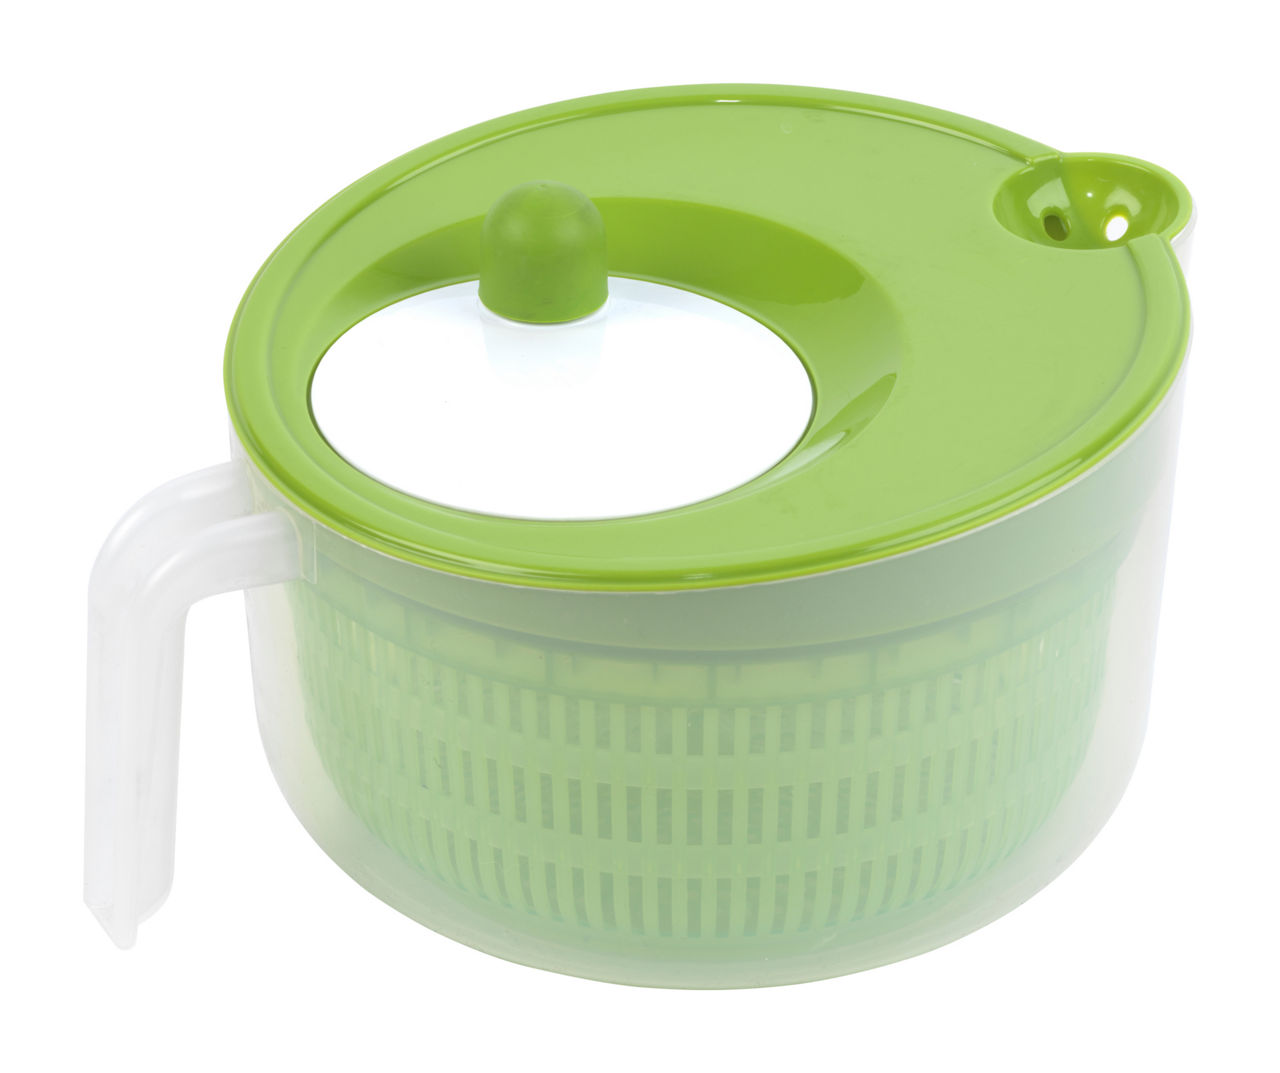 Cuisinart Green And White 5qt Salad Spinner : Target